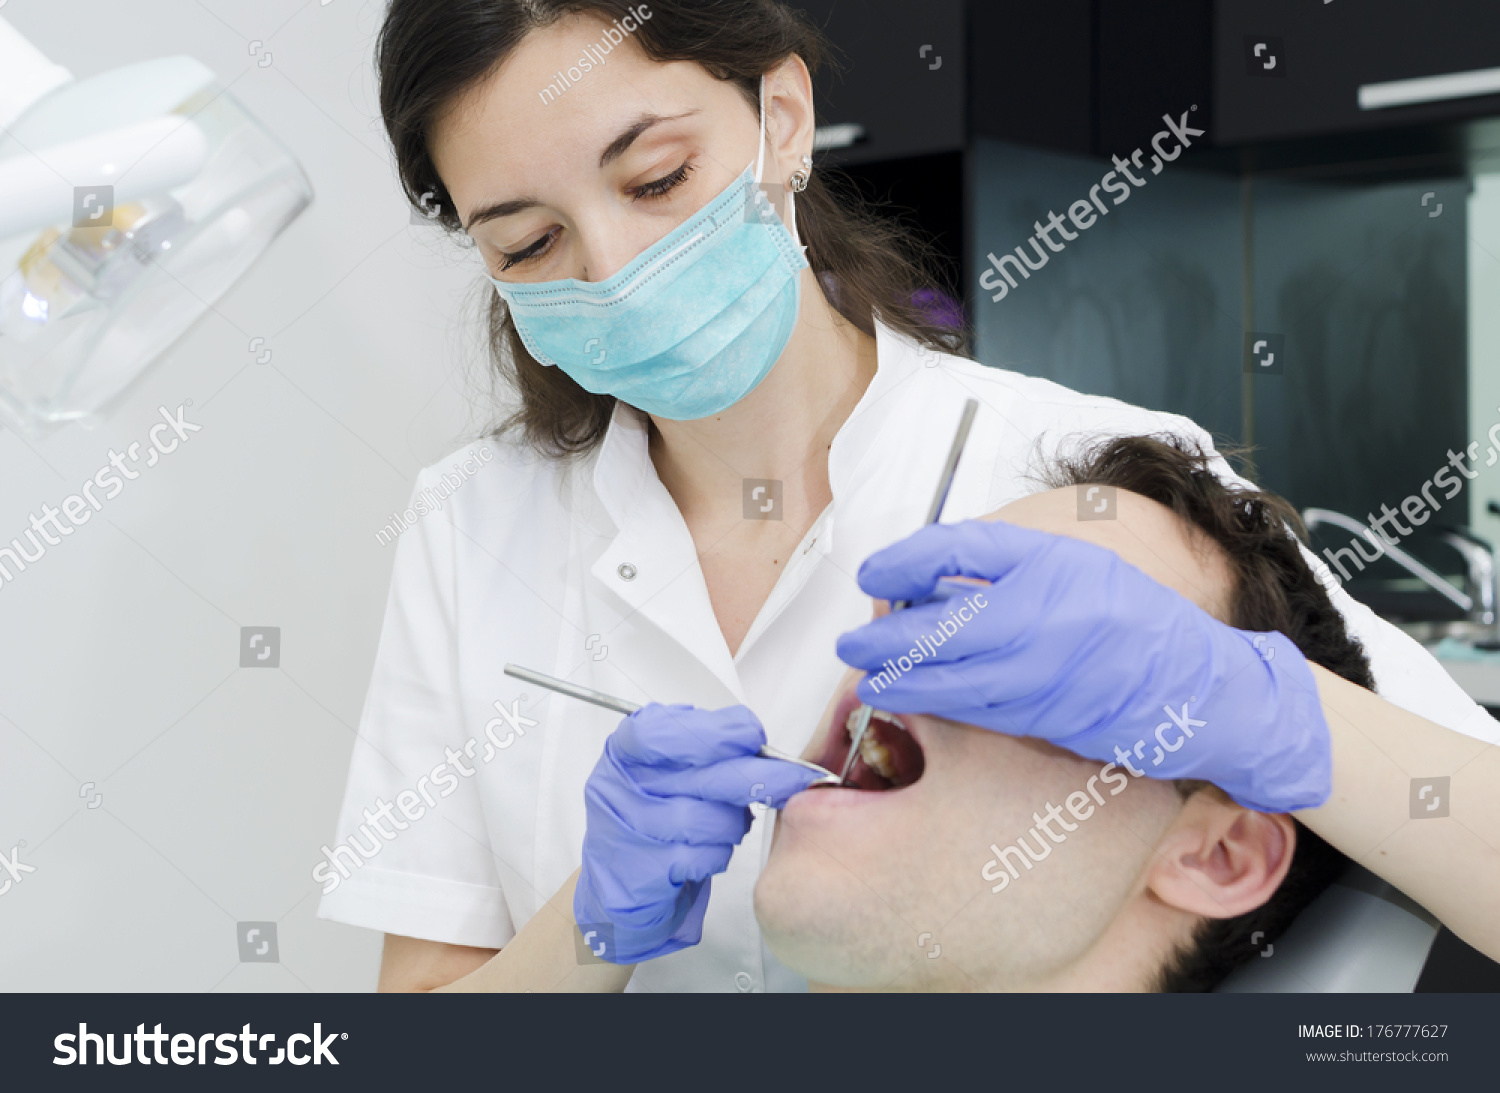 Young male with open mouth during oral checkup at the dentist #176777627